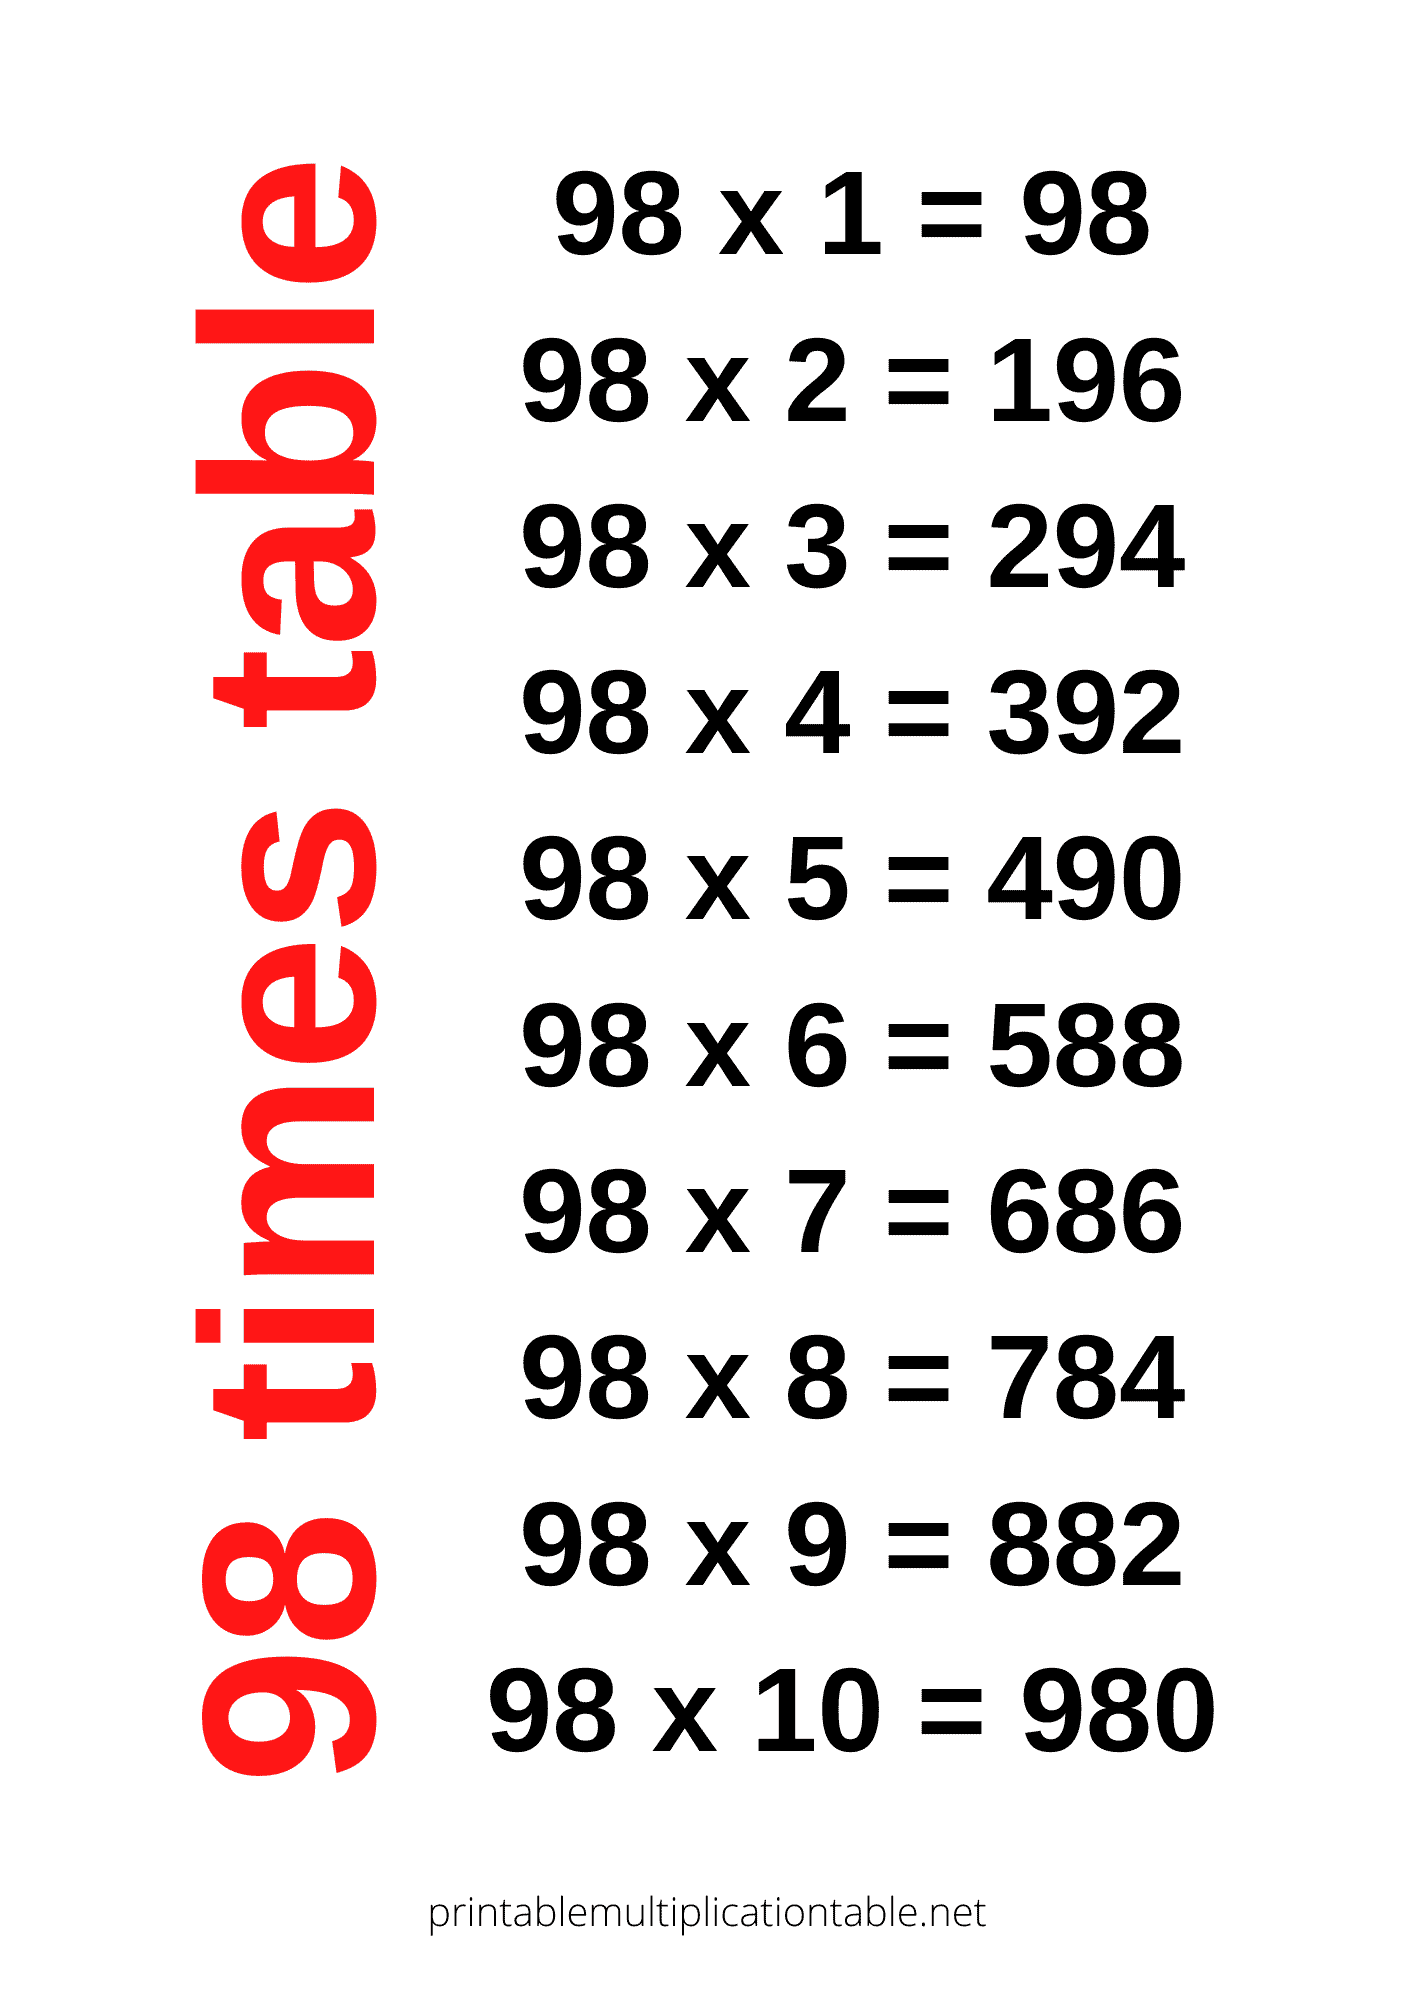 98 times table chart